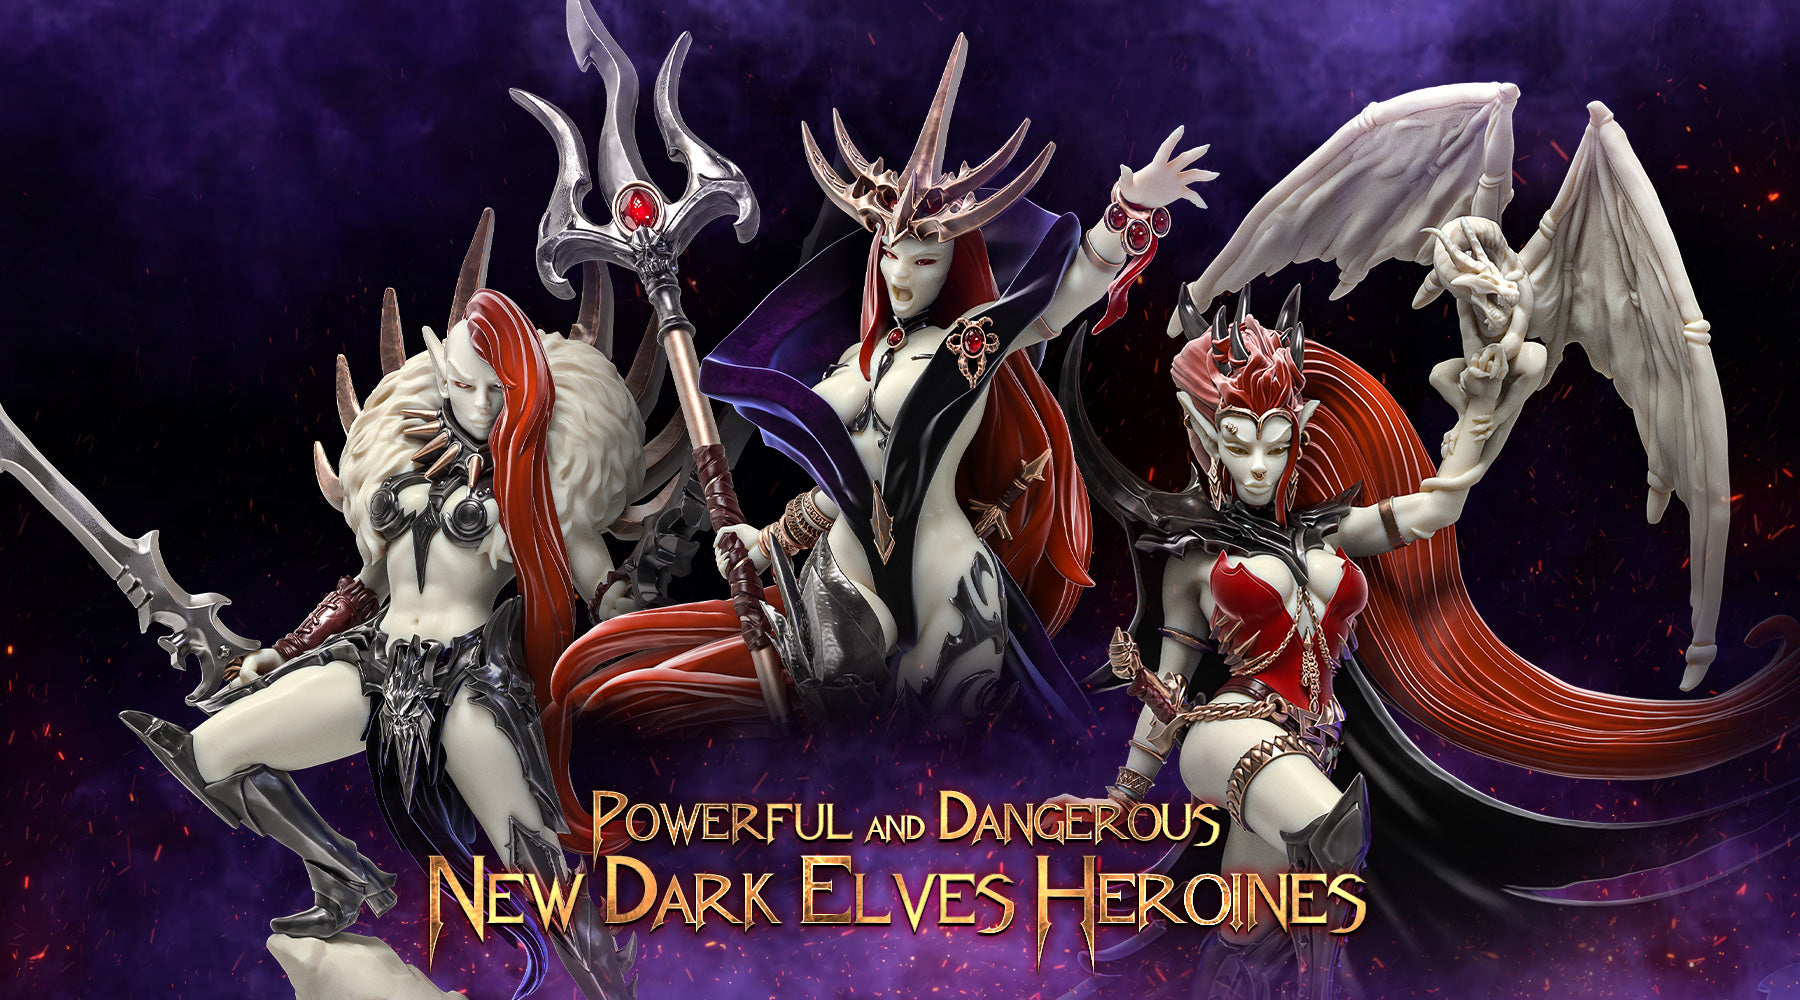 Complete your Dark Elves army!